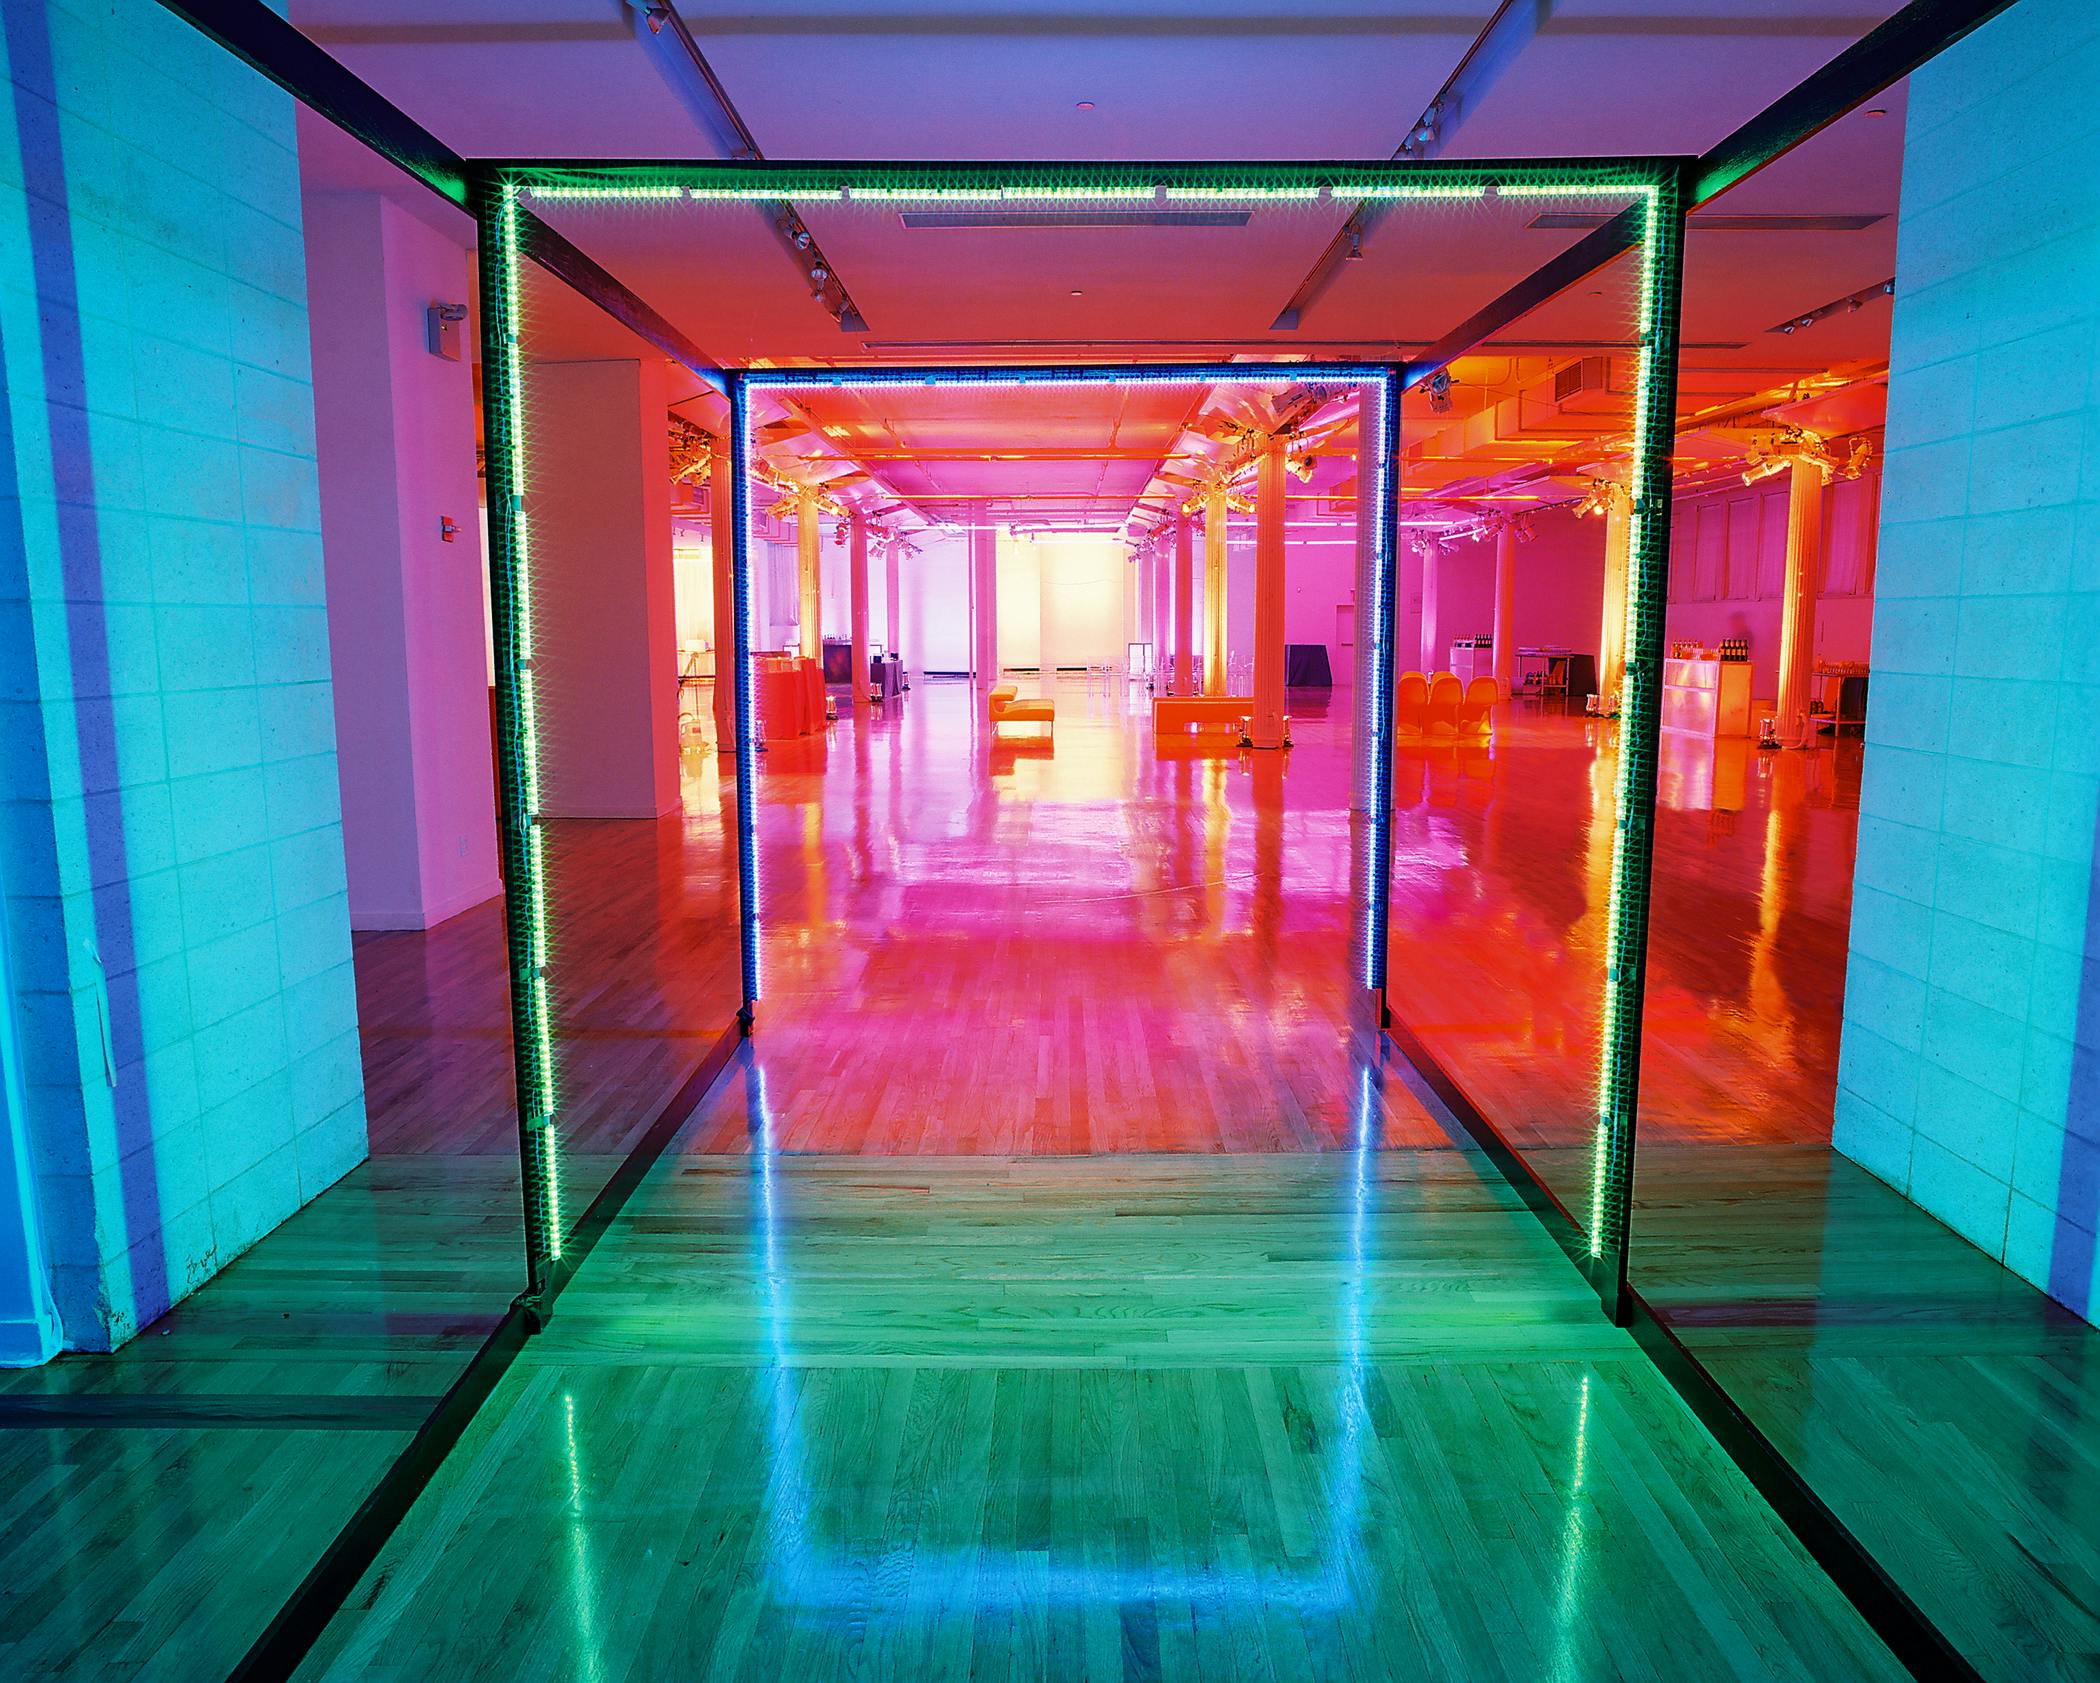 A hallway with brightly colored lights